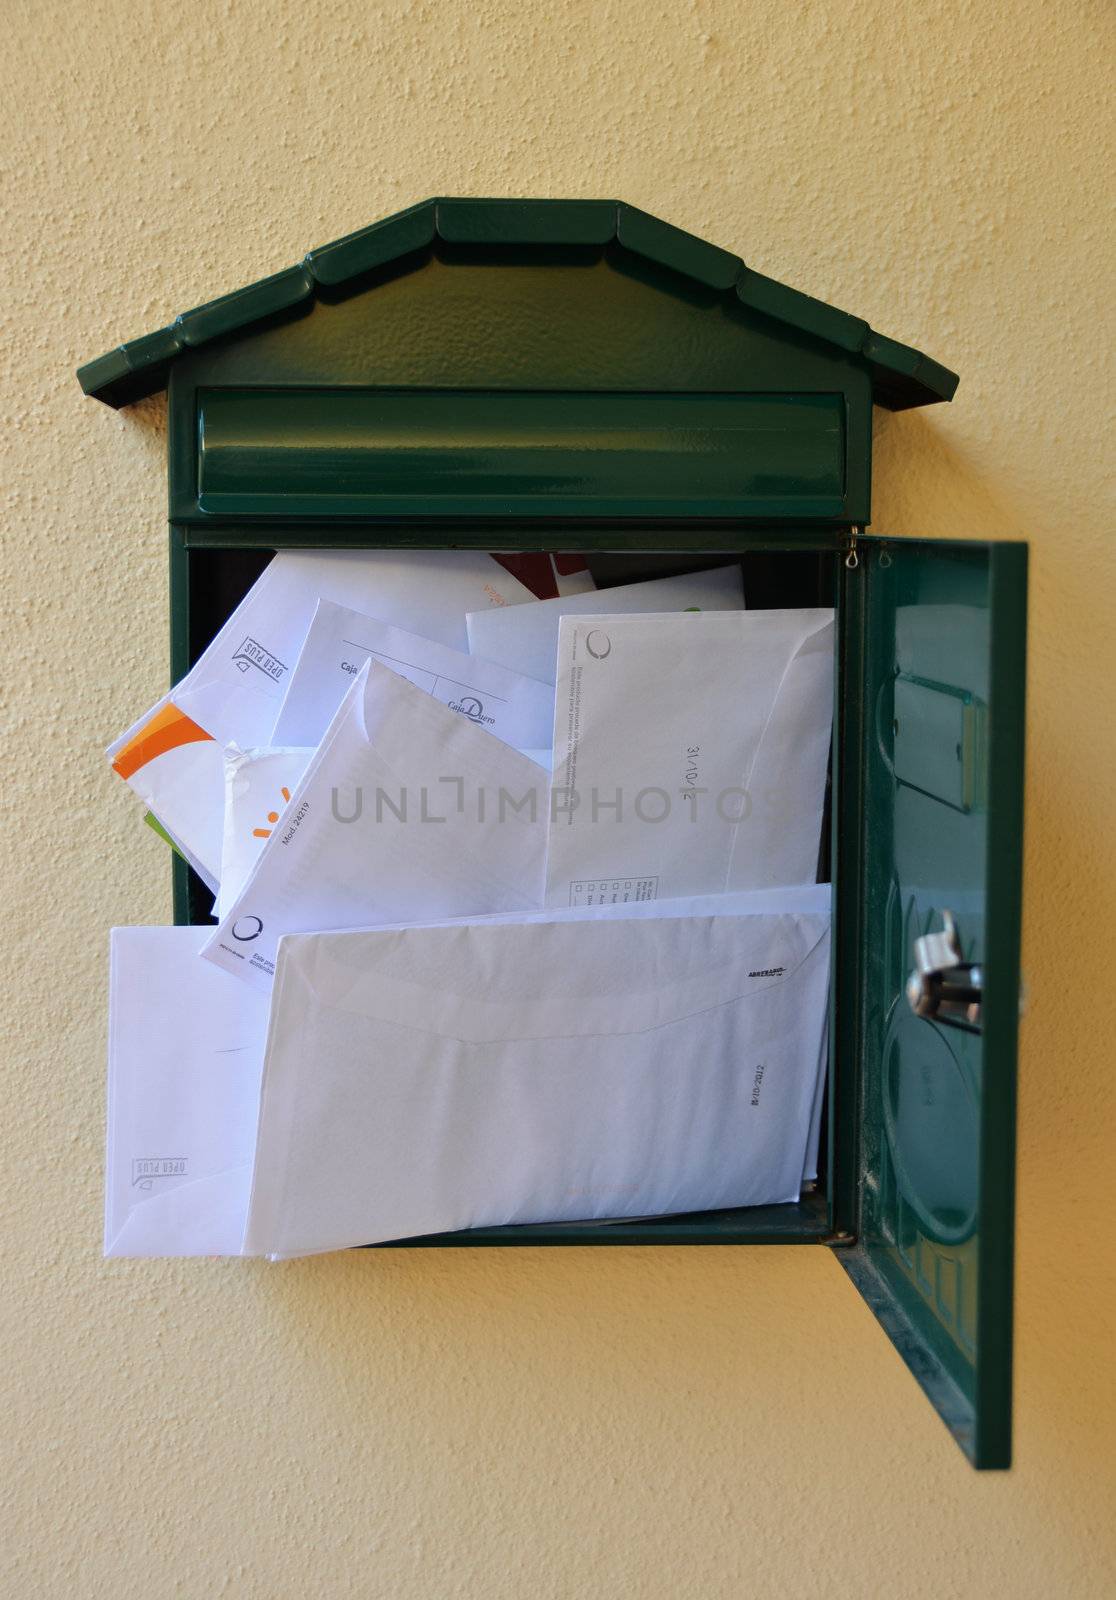 street mailbox completely filled with letters
